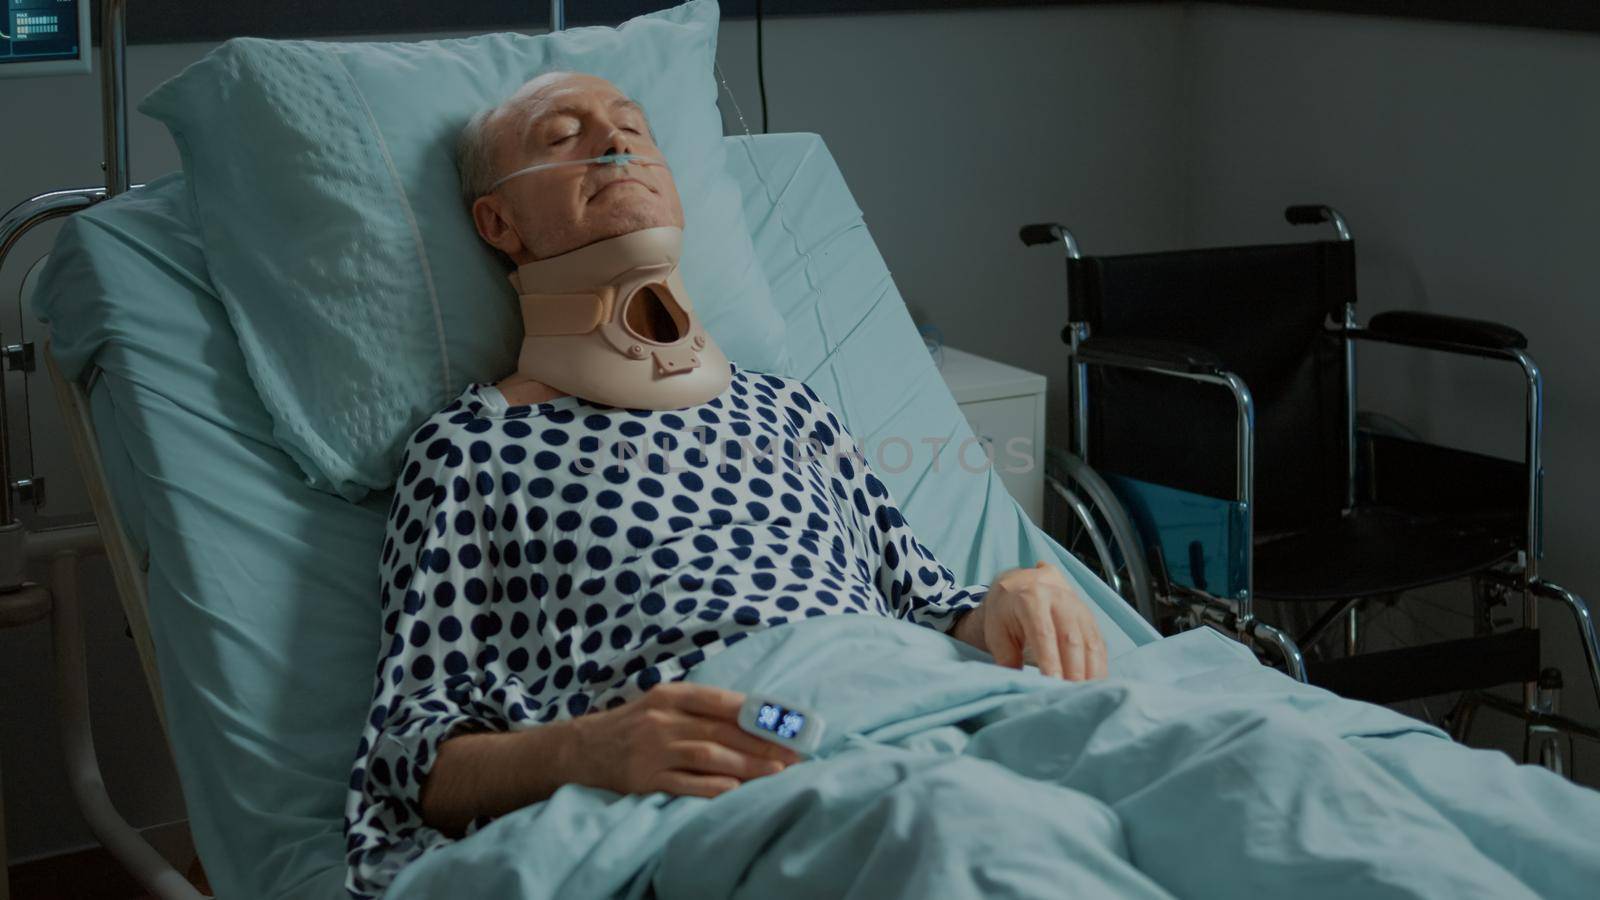 Elder patient sitting in hospital ward bed with cervical collar on neck for injury recovery at emergency room. Sick old man with nasal oxygen tube and oximeter healing from health problems